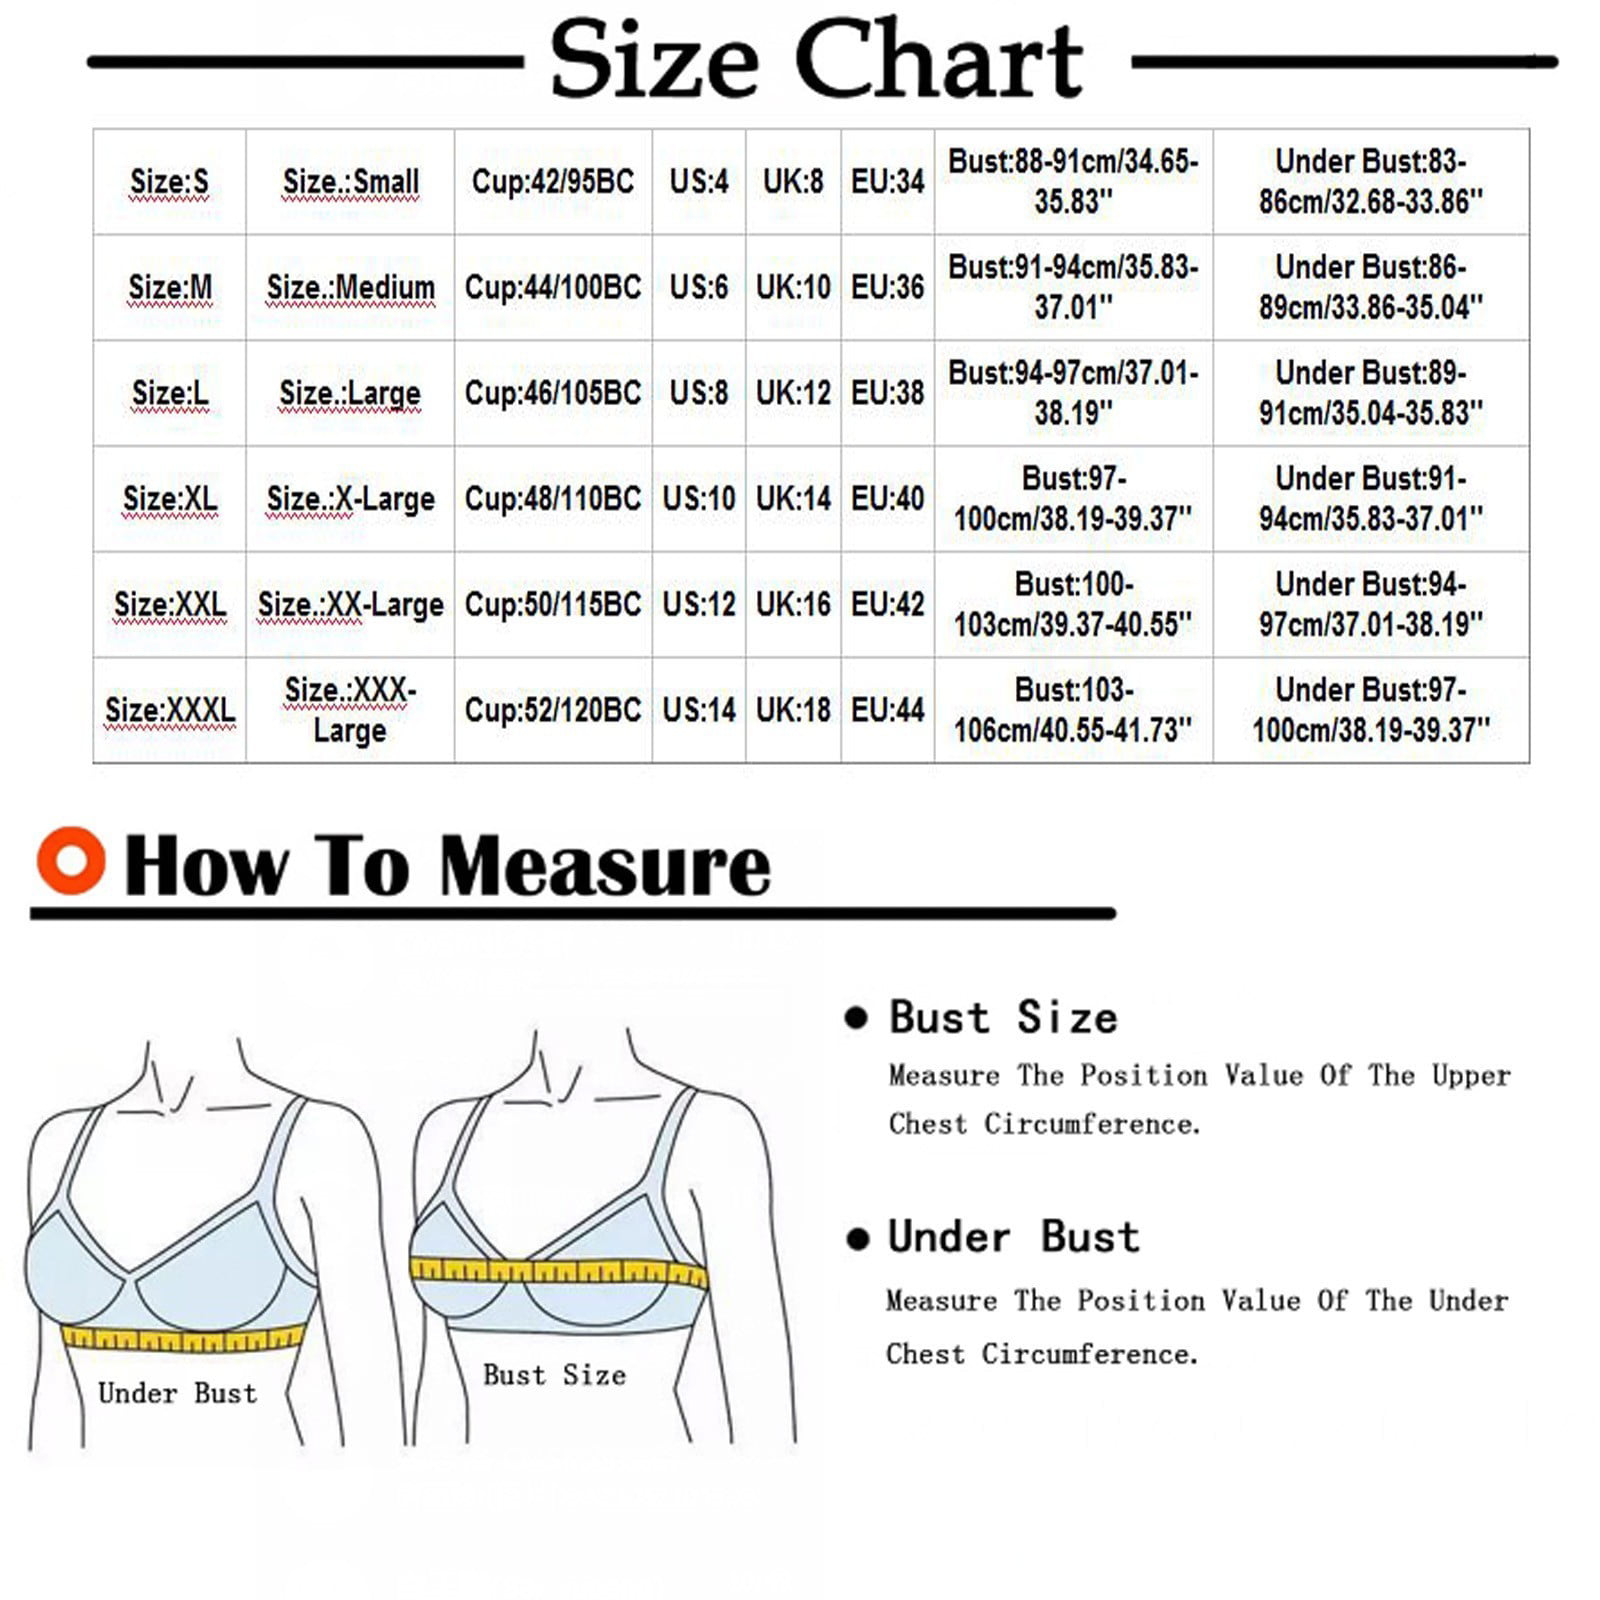 Bigersell Cotton Bras for Women Clearance Comfortable Bras for Women  Full-Figure Bra Style B31 V-Neck Seamless Bras Pull-On Bra Closure Juniors  Plus Size Sports Bras for Women 